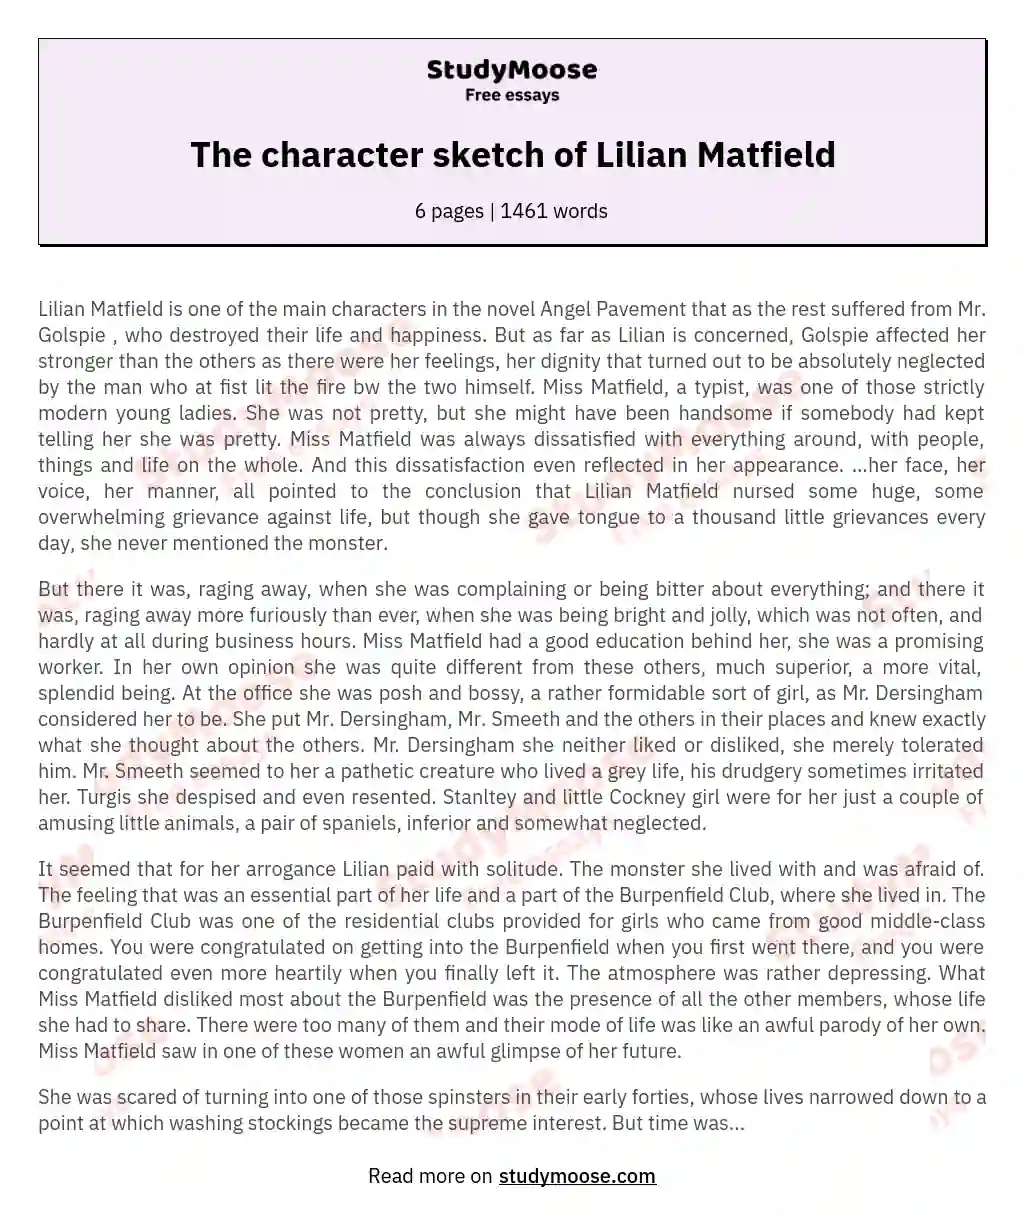 The character sketch of Lilian Matfield